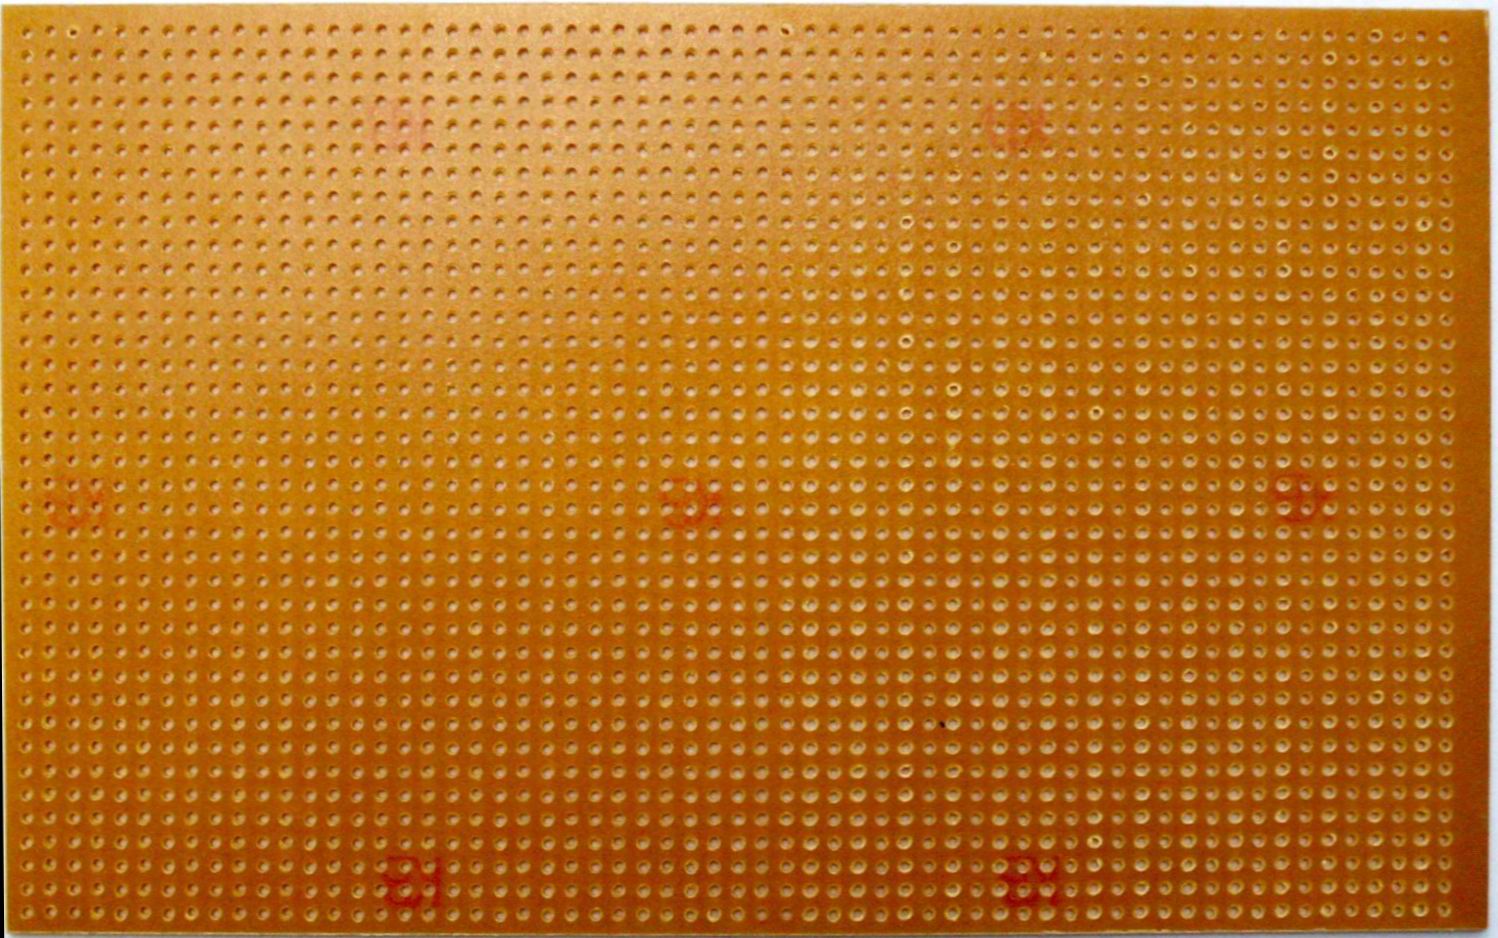 Kemo E010 Experimental Prototype Board punched perforated board (without copper tracks)